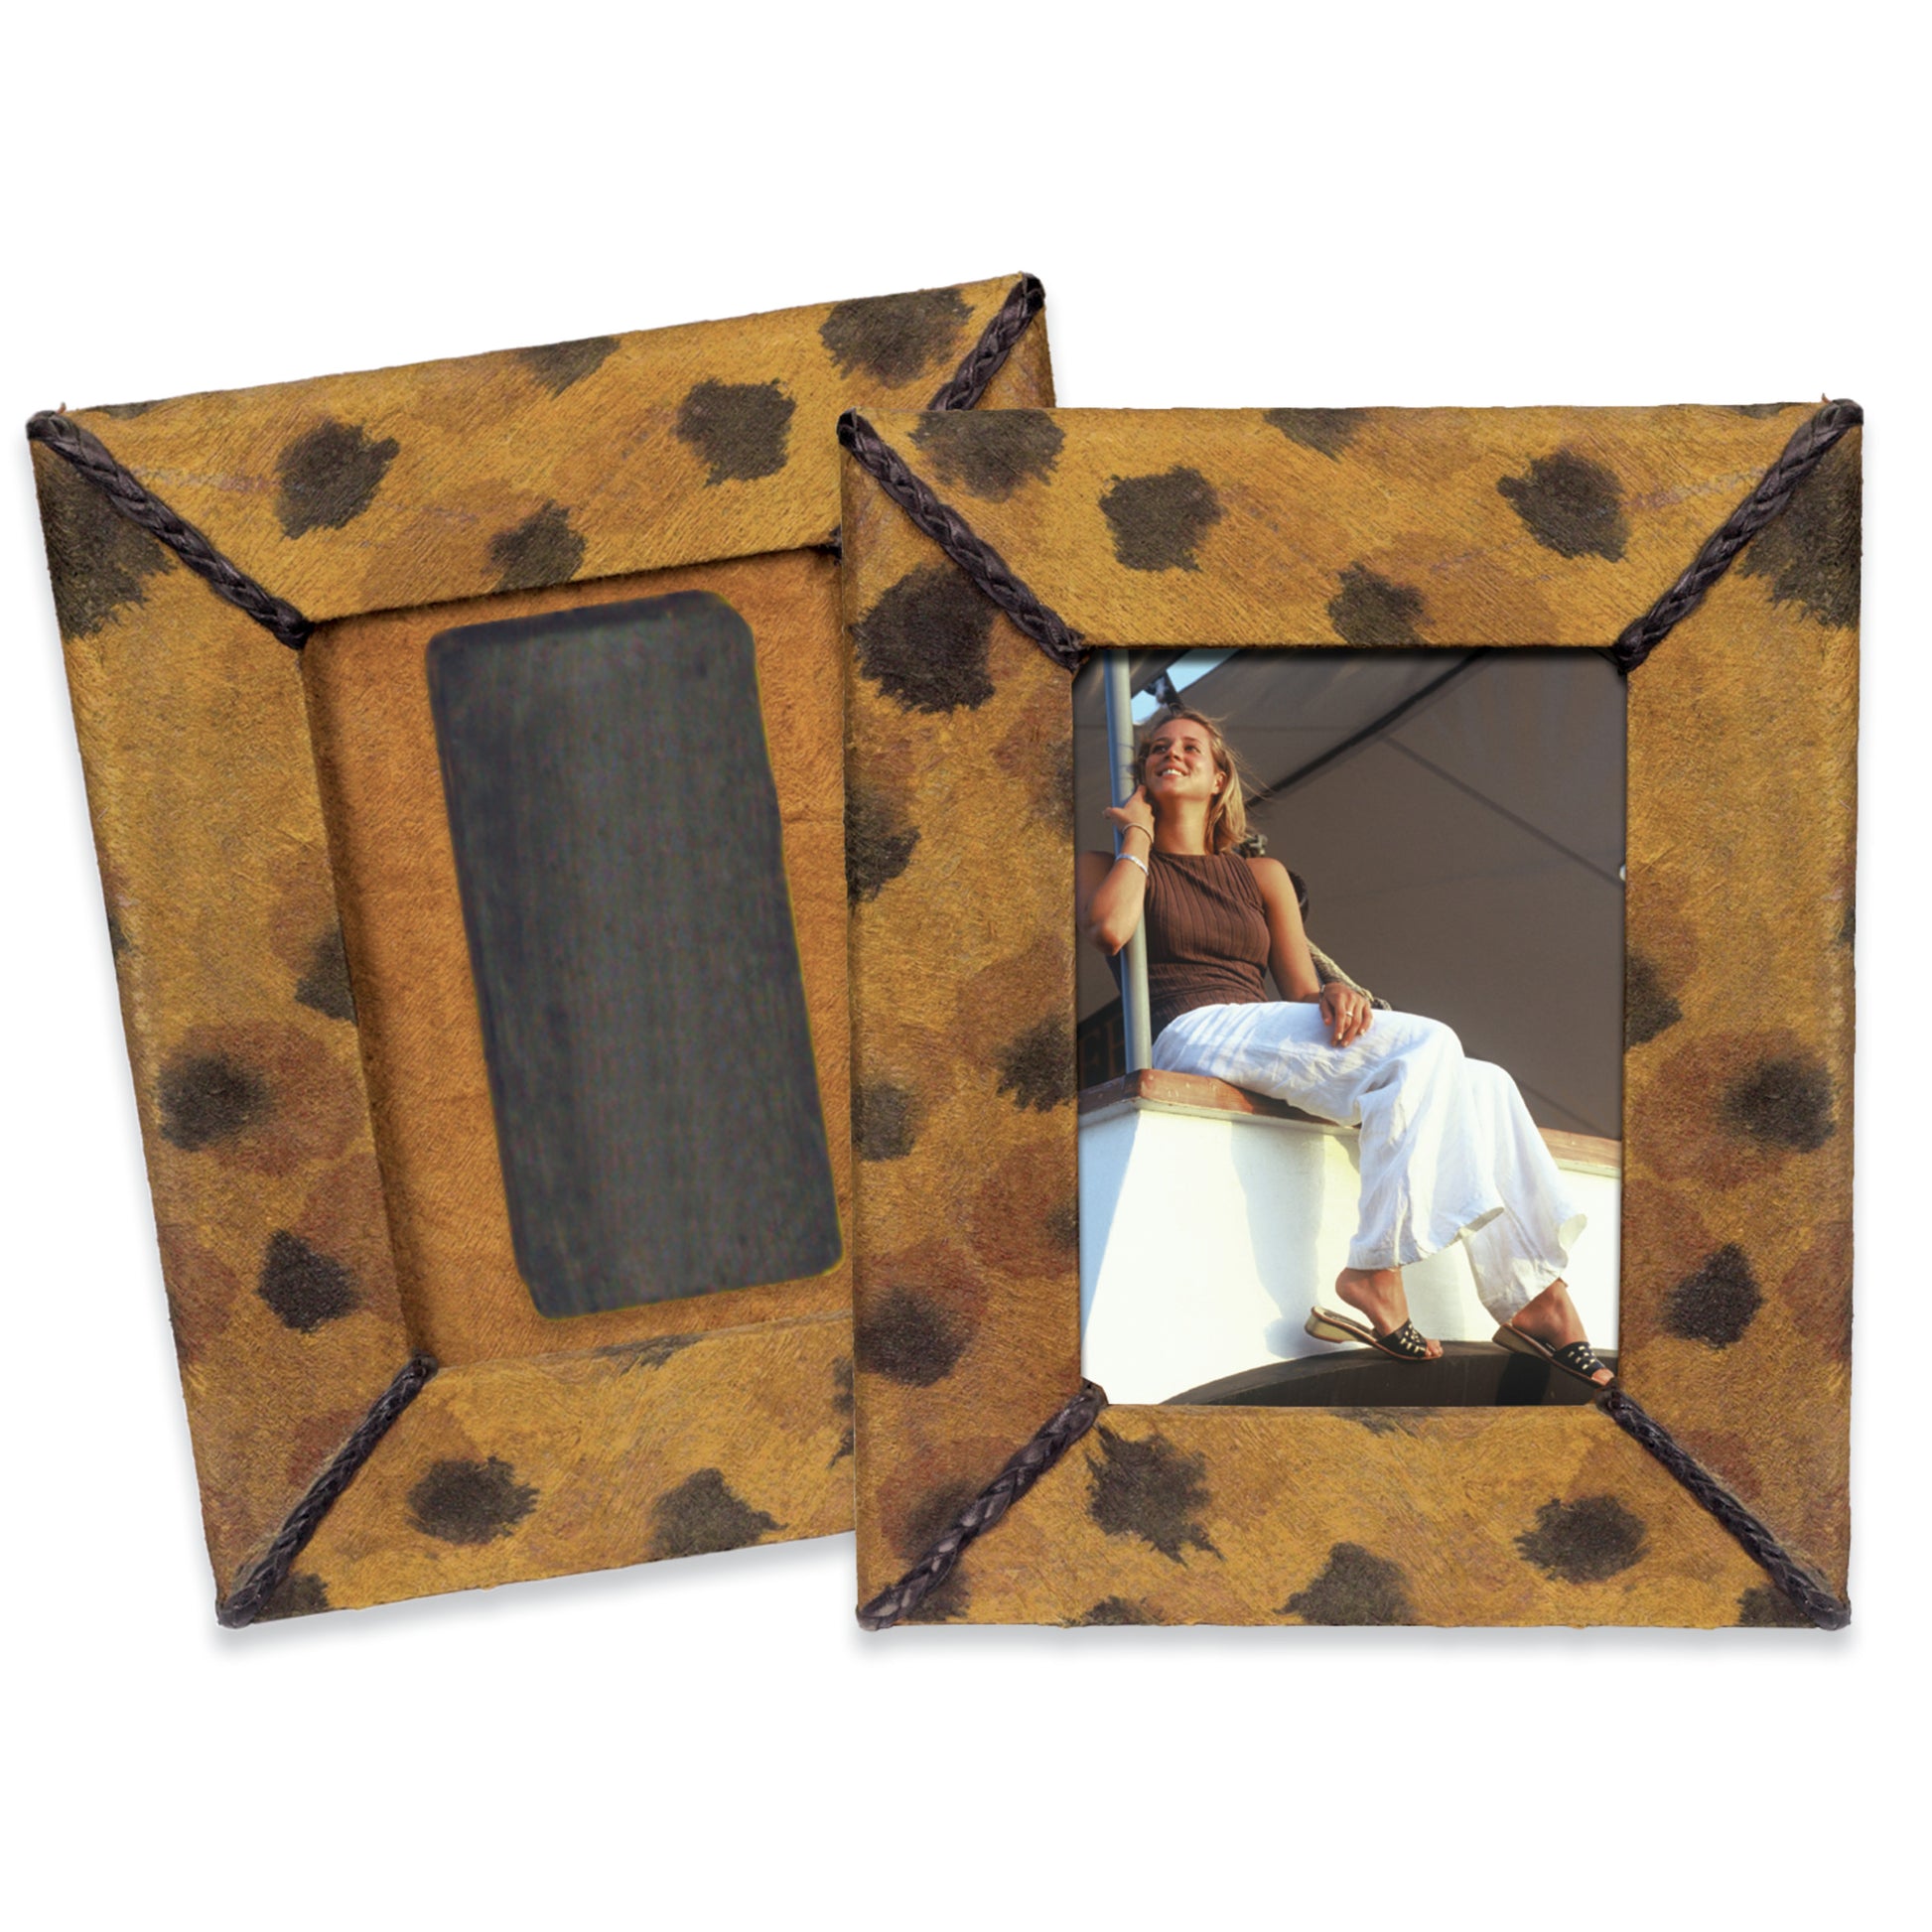 Load image into Gallery viewer, CB247MAG Ceramic Block Magnet - In Use